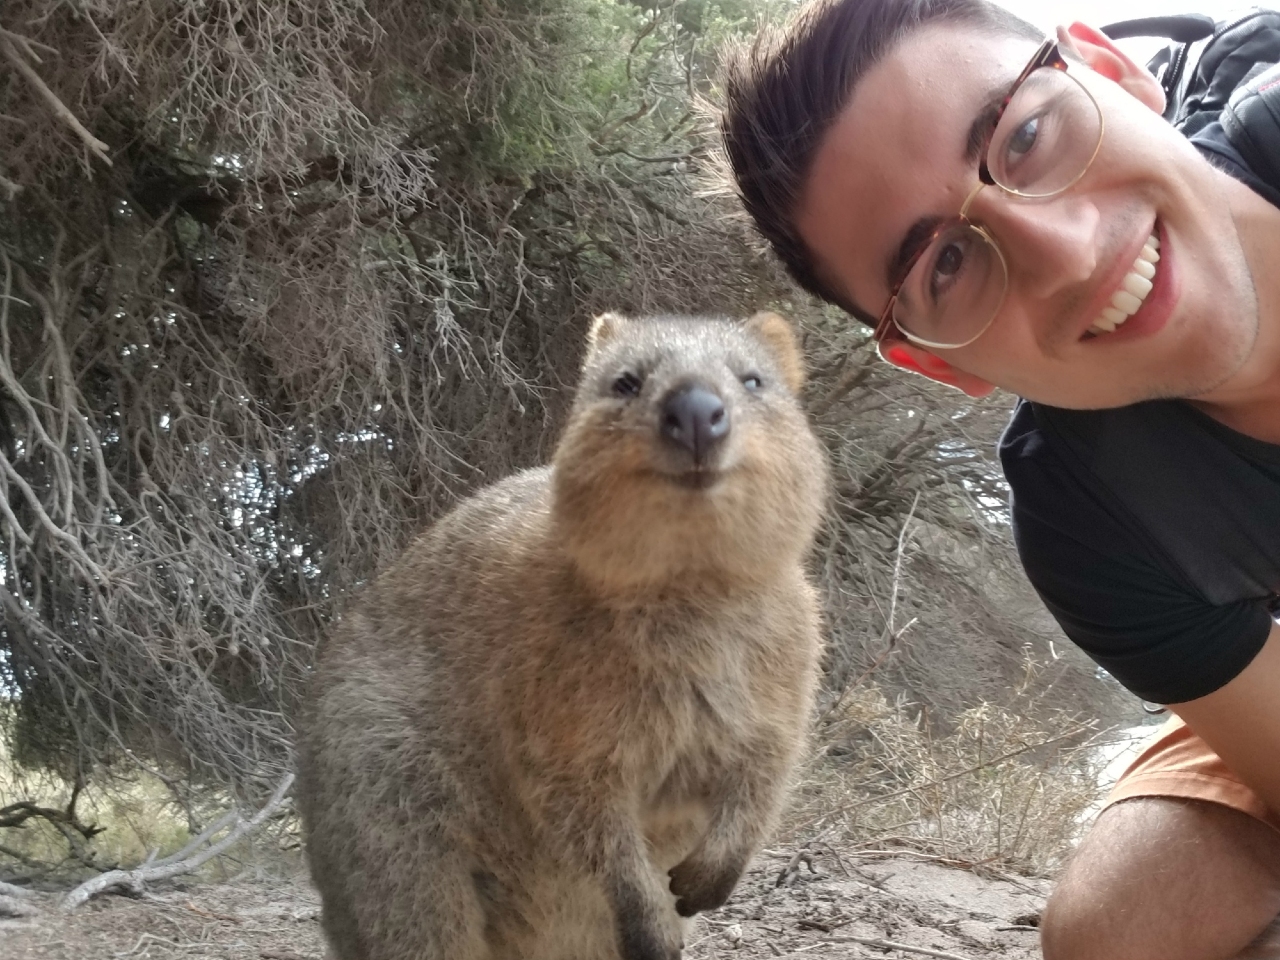 Me and this Wombat